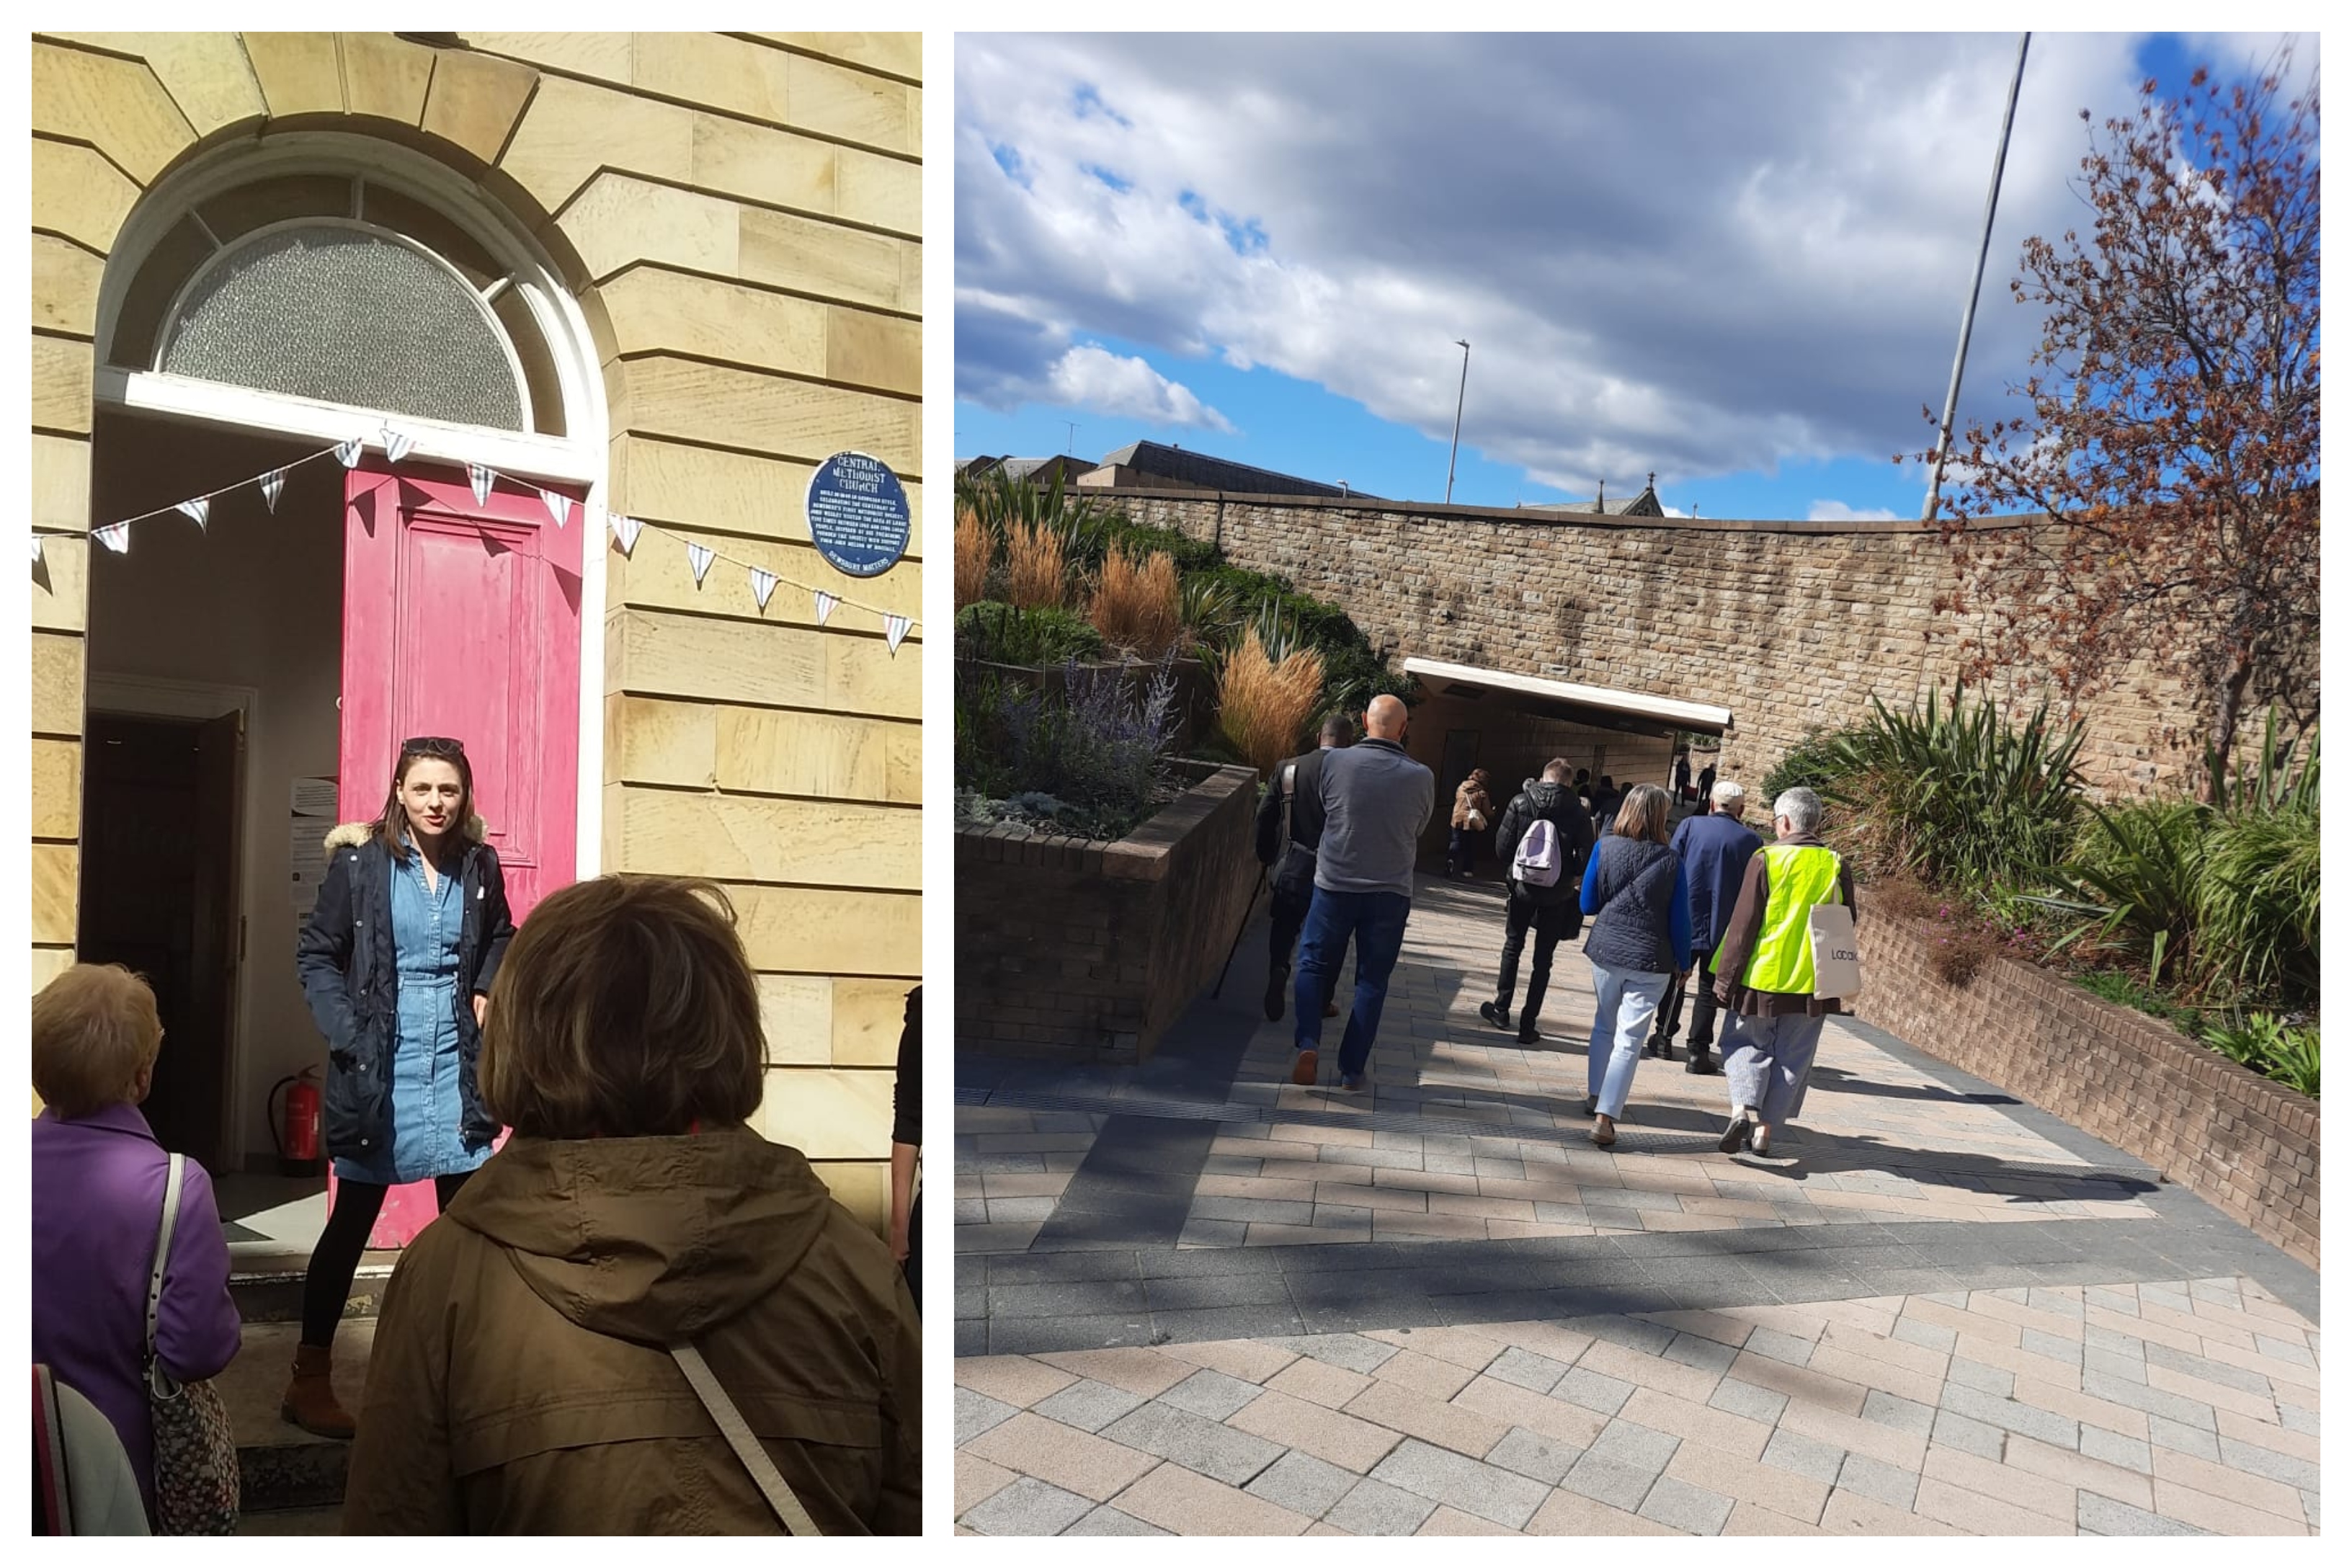 Two photographs of tour group. First looking at the entrance to a building, Second, walking towards a wall in an urban garden.